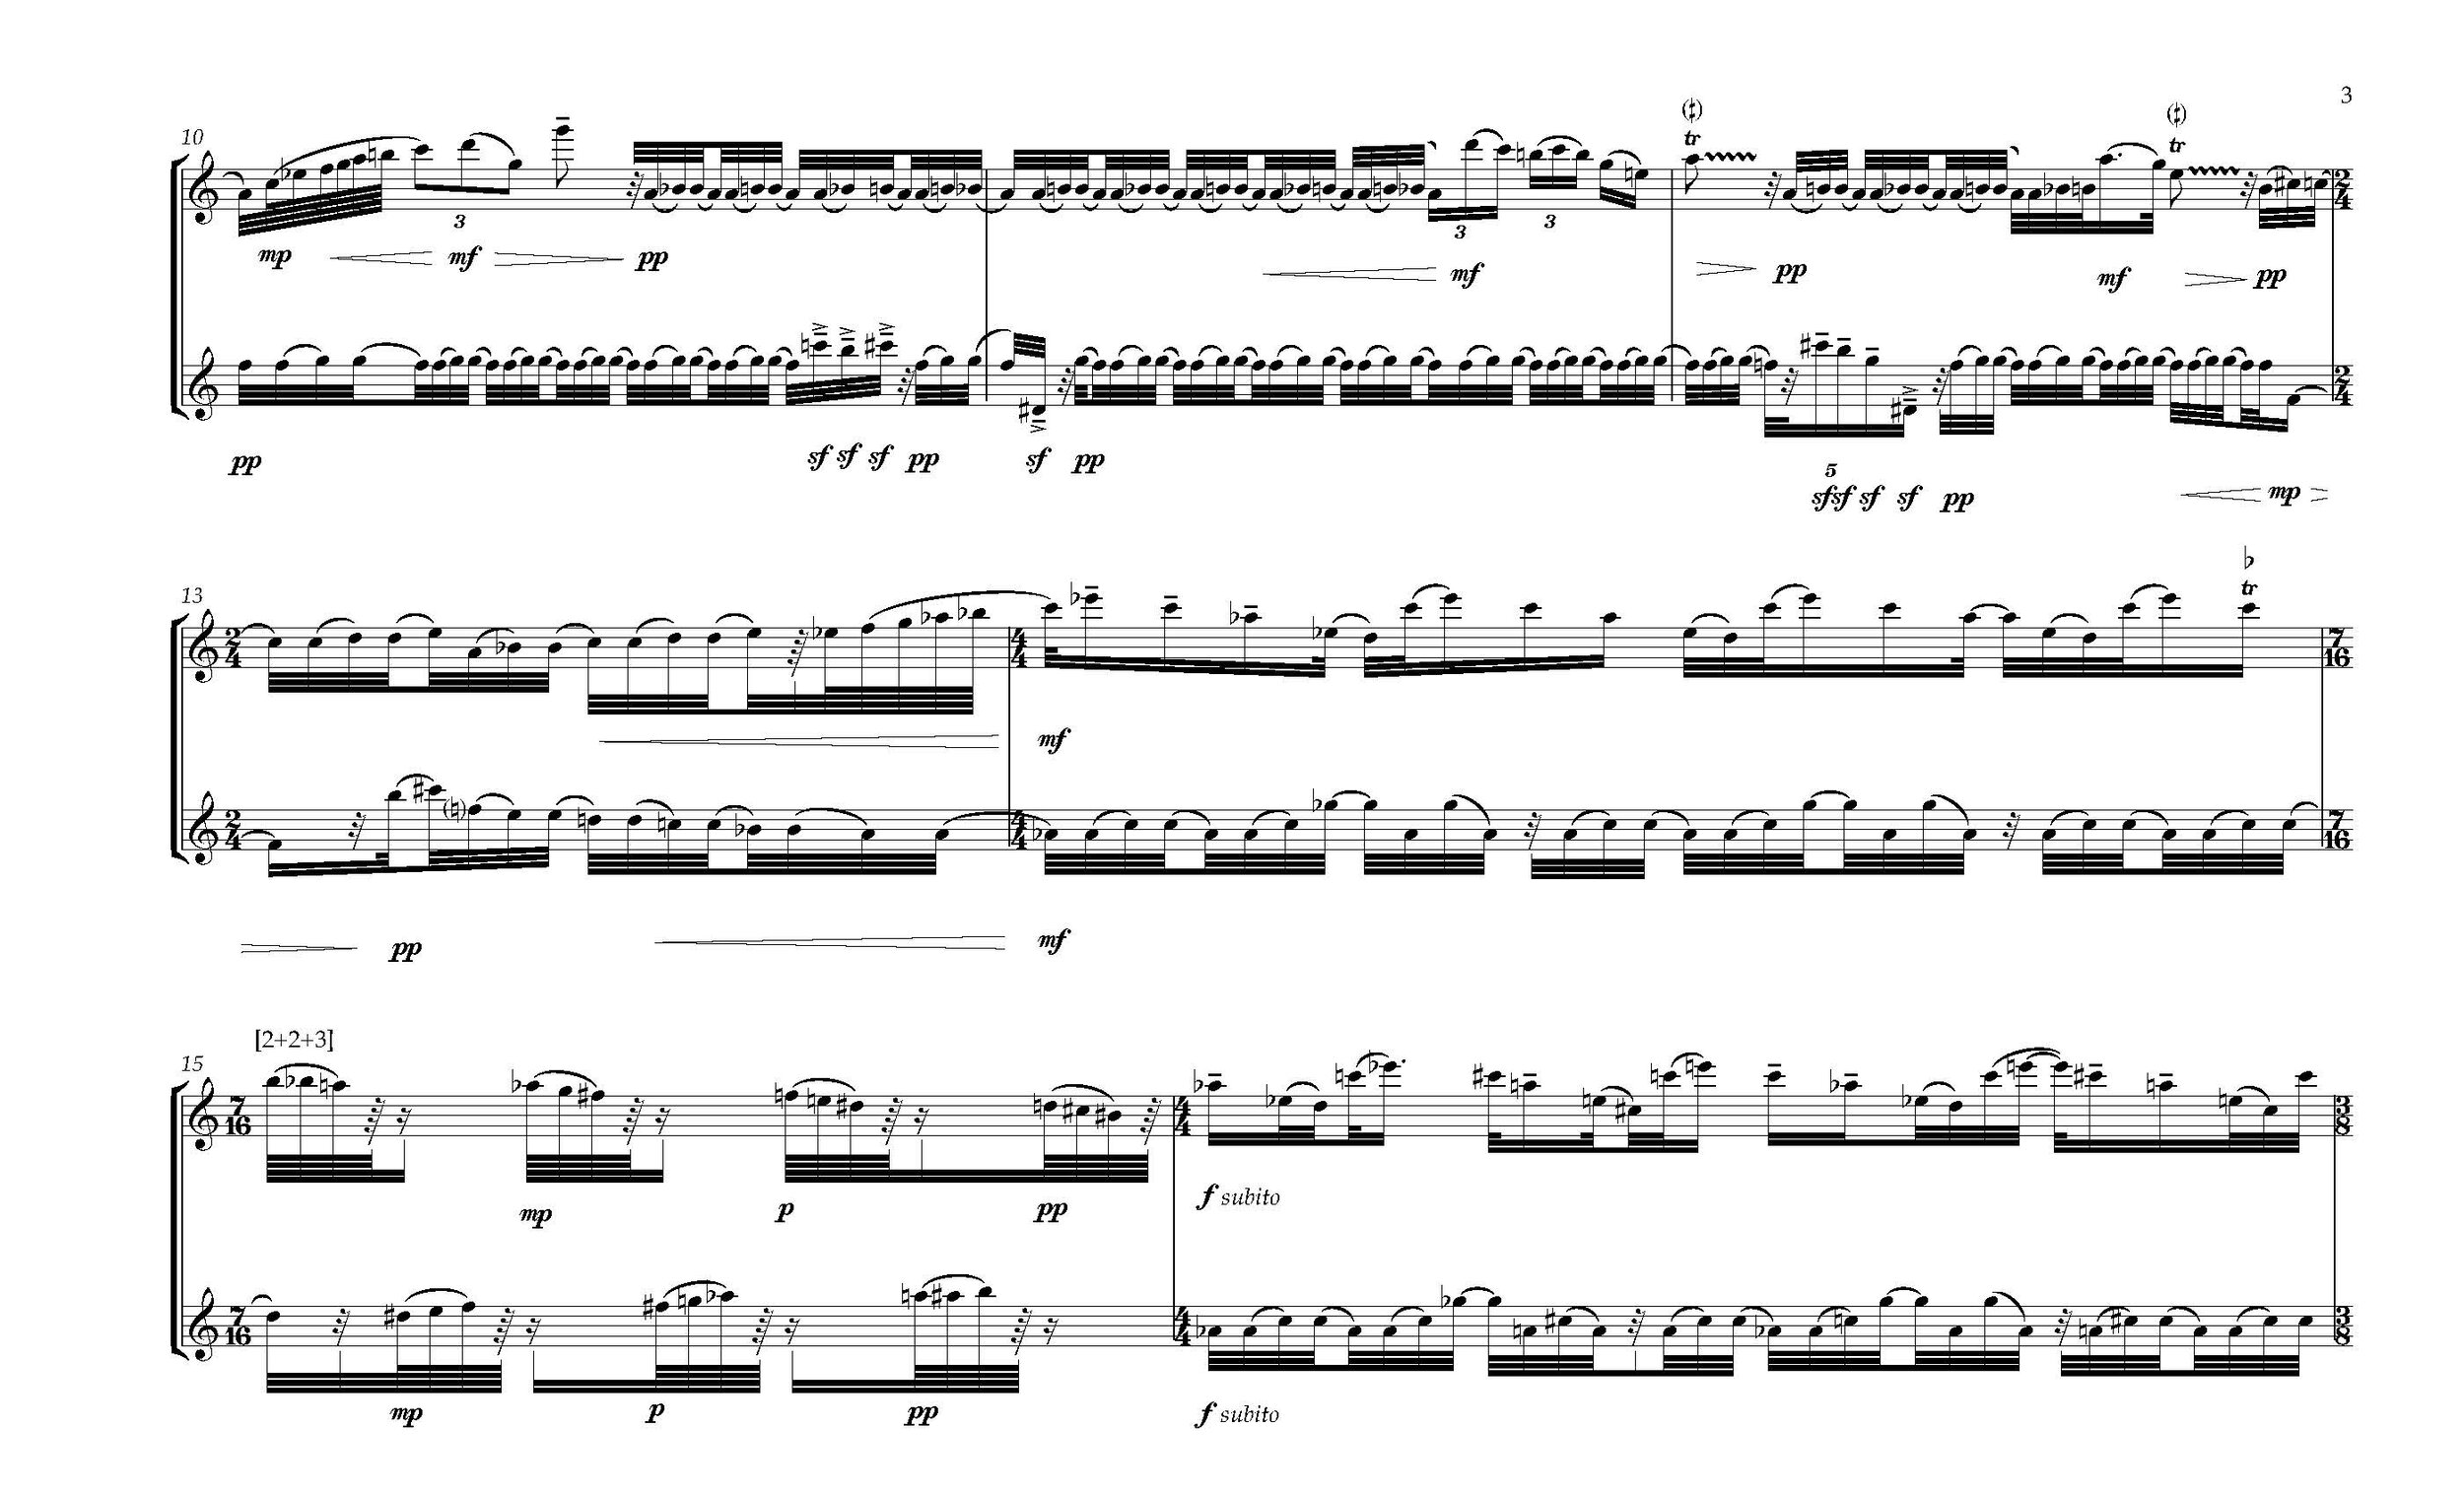 One Final Gyre - Complete Score_Page_11.jpg